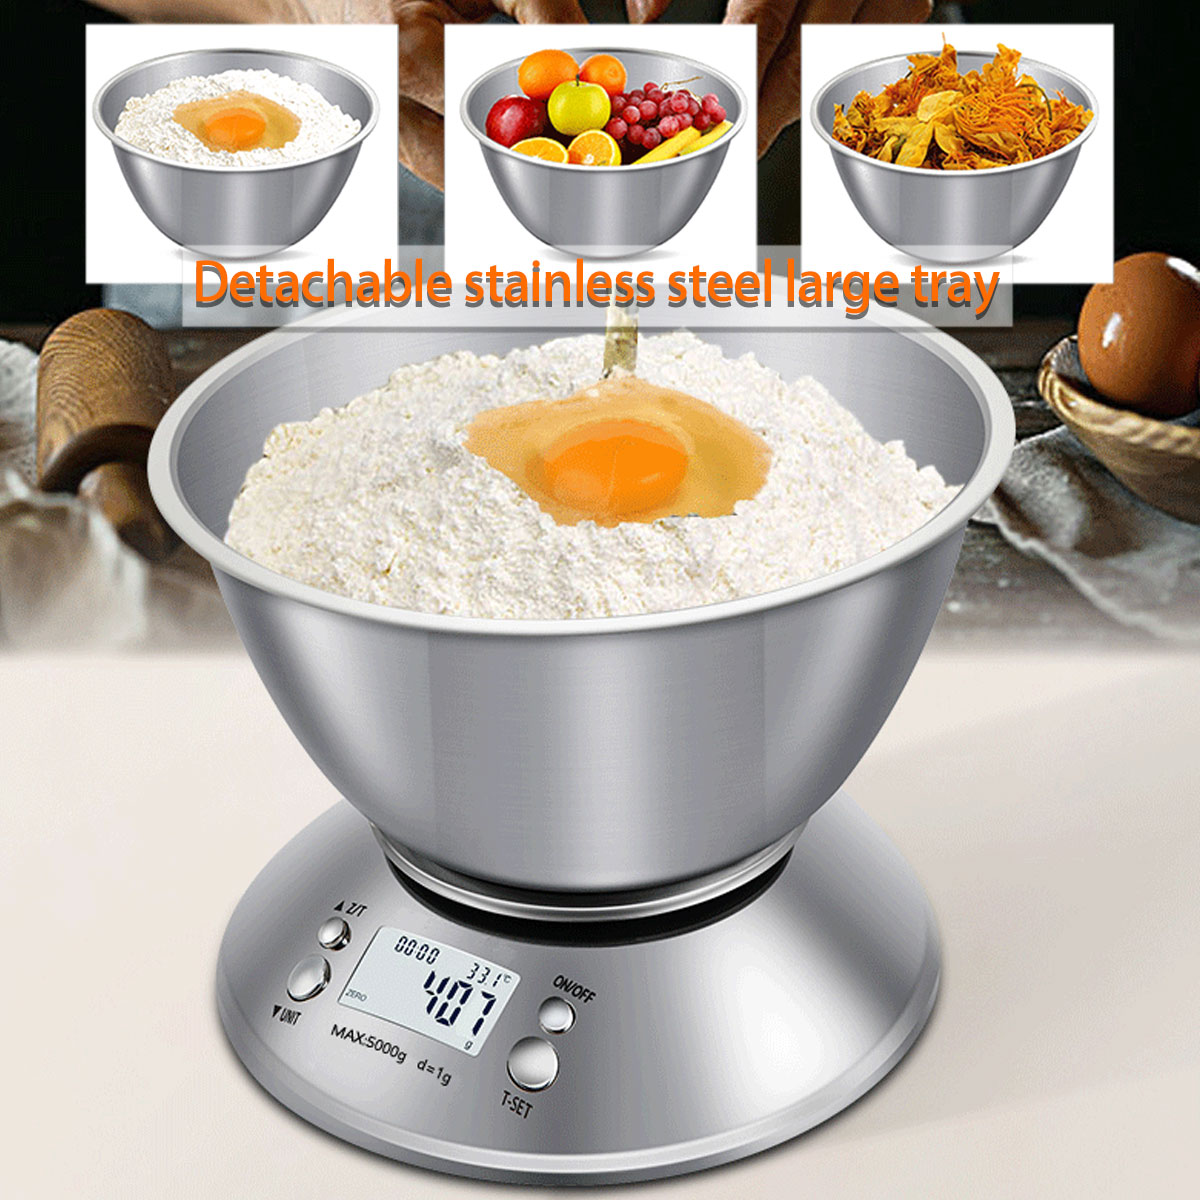 Digital-Kitchen-Scale-LCD-Display-Stainless-Steel-Baking-High-Precision-Removable-Kitchen-Scale-1859940-2